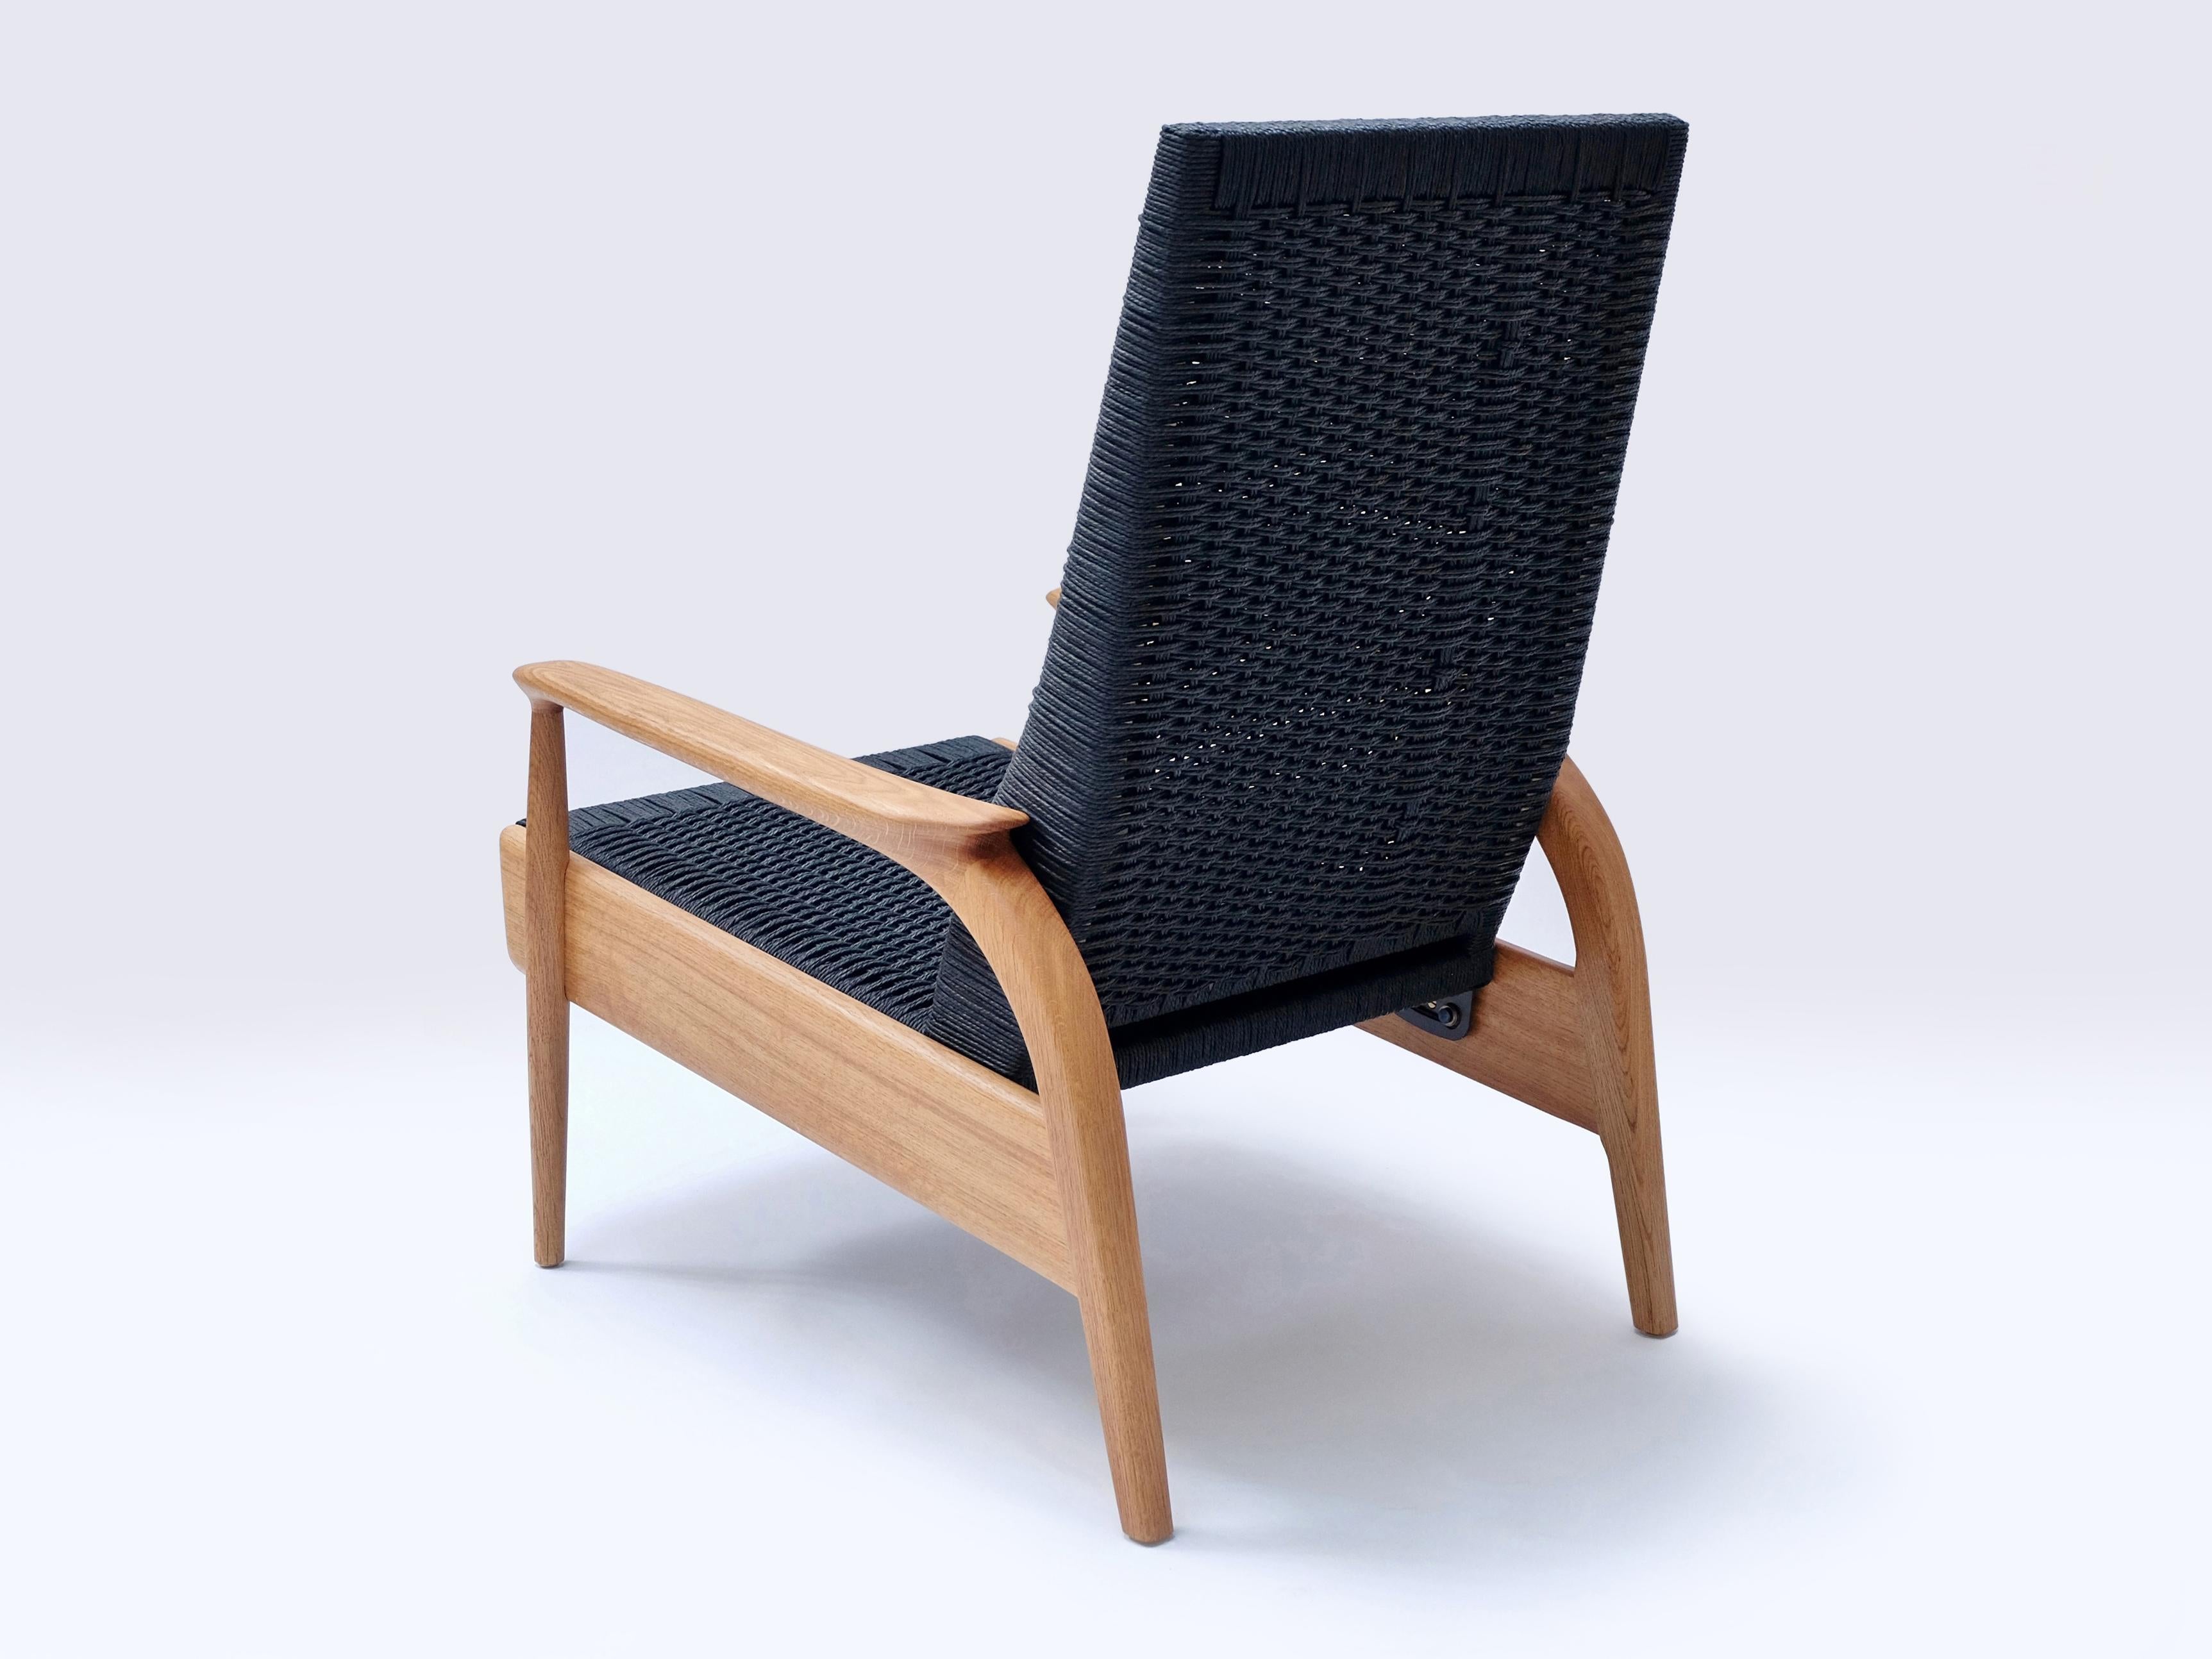 Custom-Made Lounge Chair in Solid Oak& Black Danish Cord with Leather Cushions For Sale 1